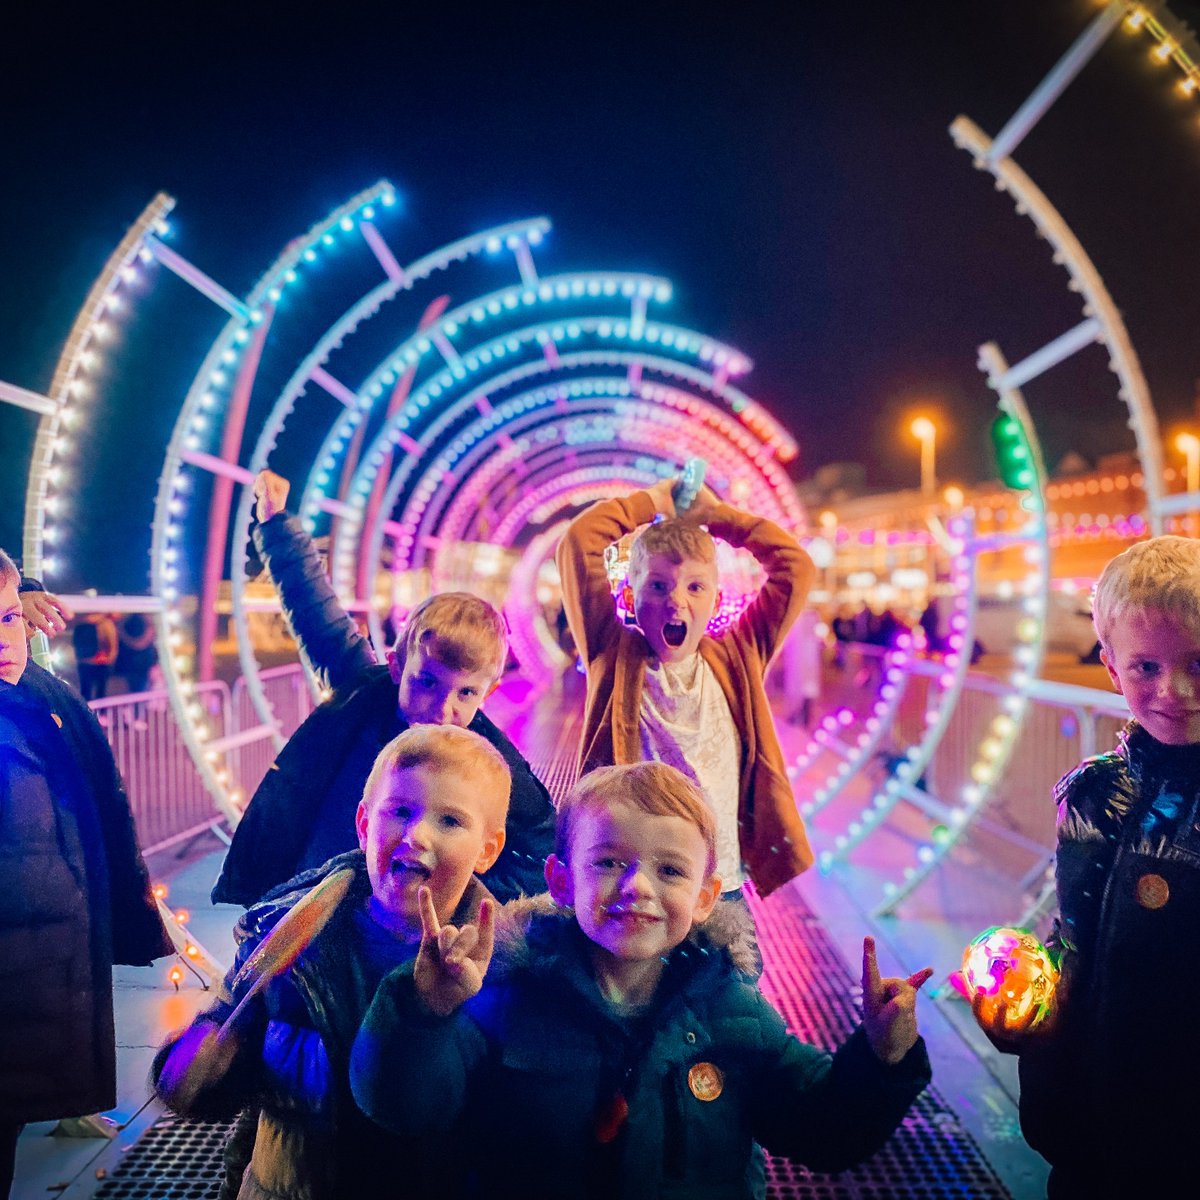 Heading to Blackpool for the Illuminations or the World Fireworks Championship Blackpool this month? Northern have over 100,000 10p train tickets on selected routes including to Blackpool, as well as flash sale tickets for 50p, £1 and £2! 🔗 bit.ly/45cYMXK